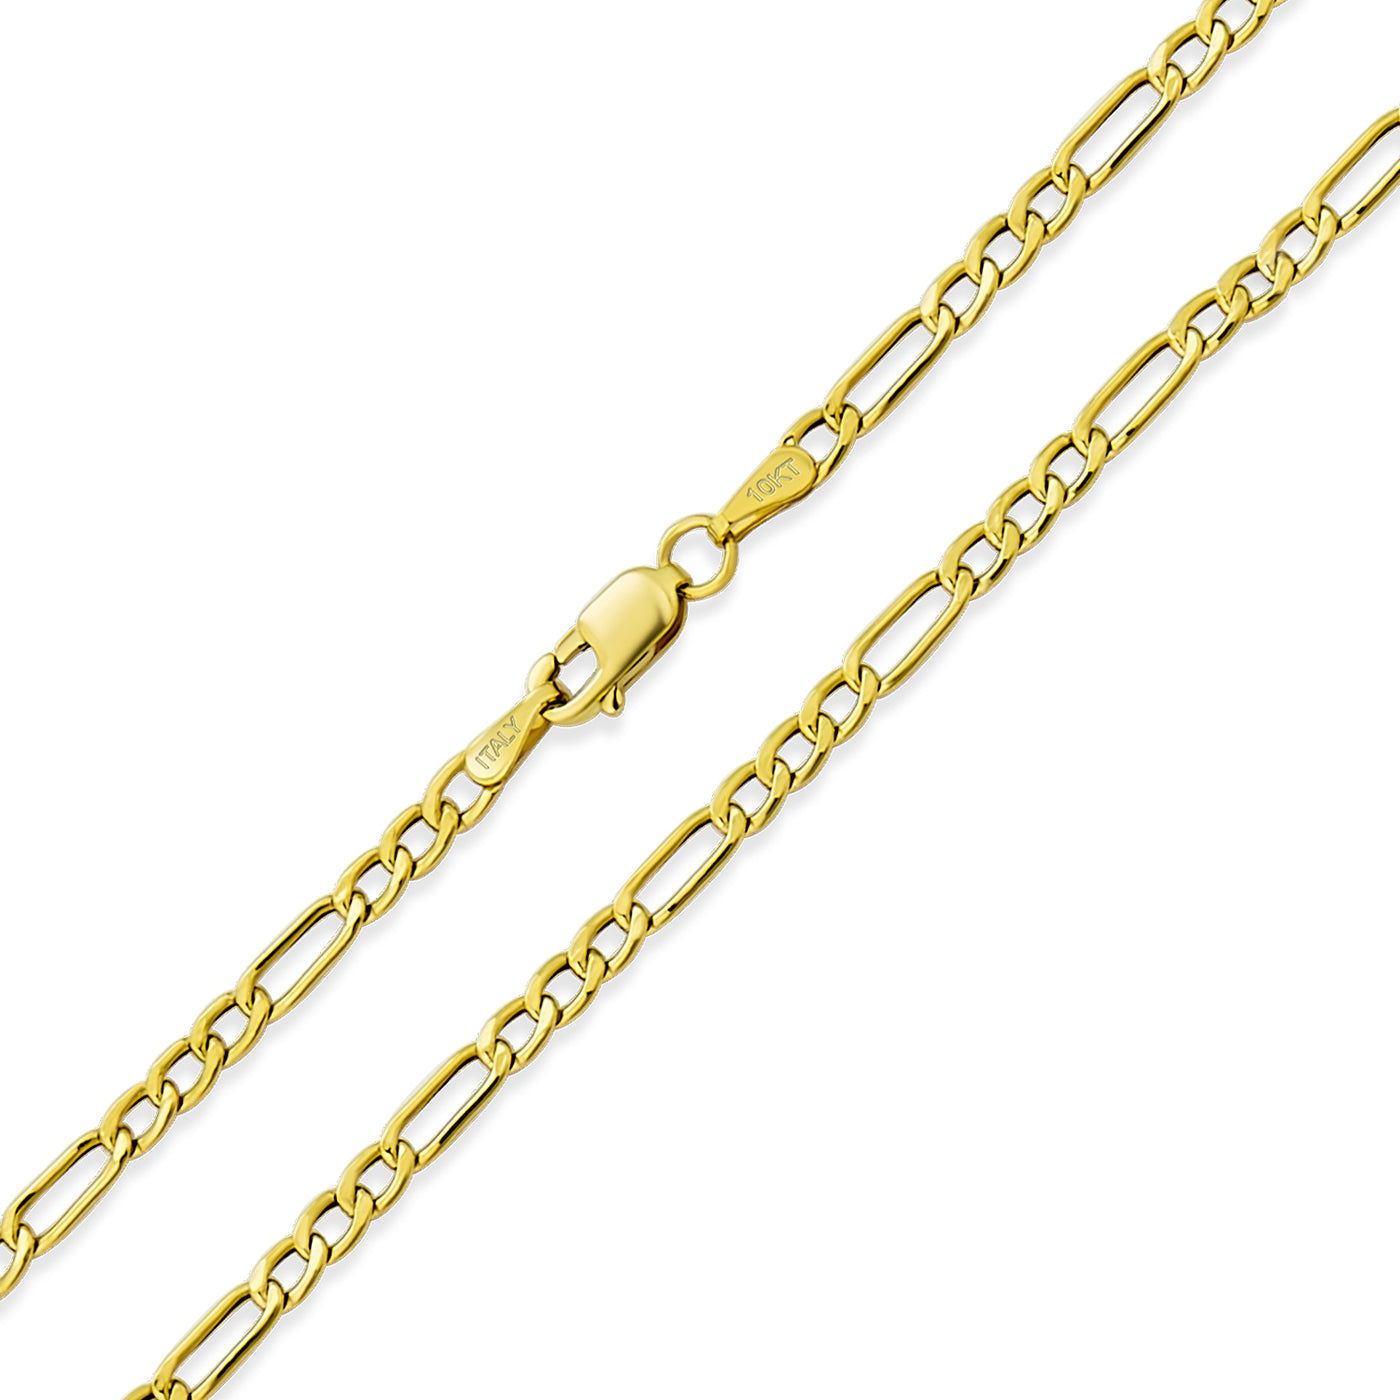 Unisex Thin 2MM Solid Yellow 10K Gold Figaro Chain Necklace 16-24"